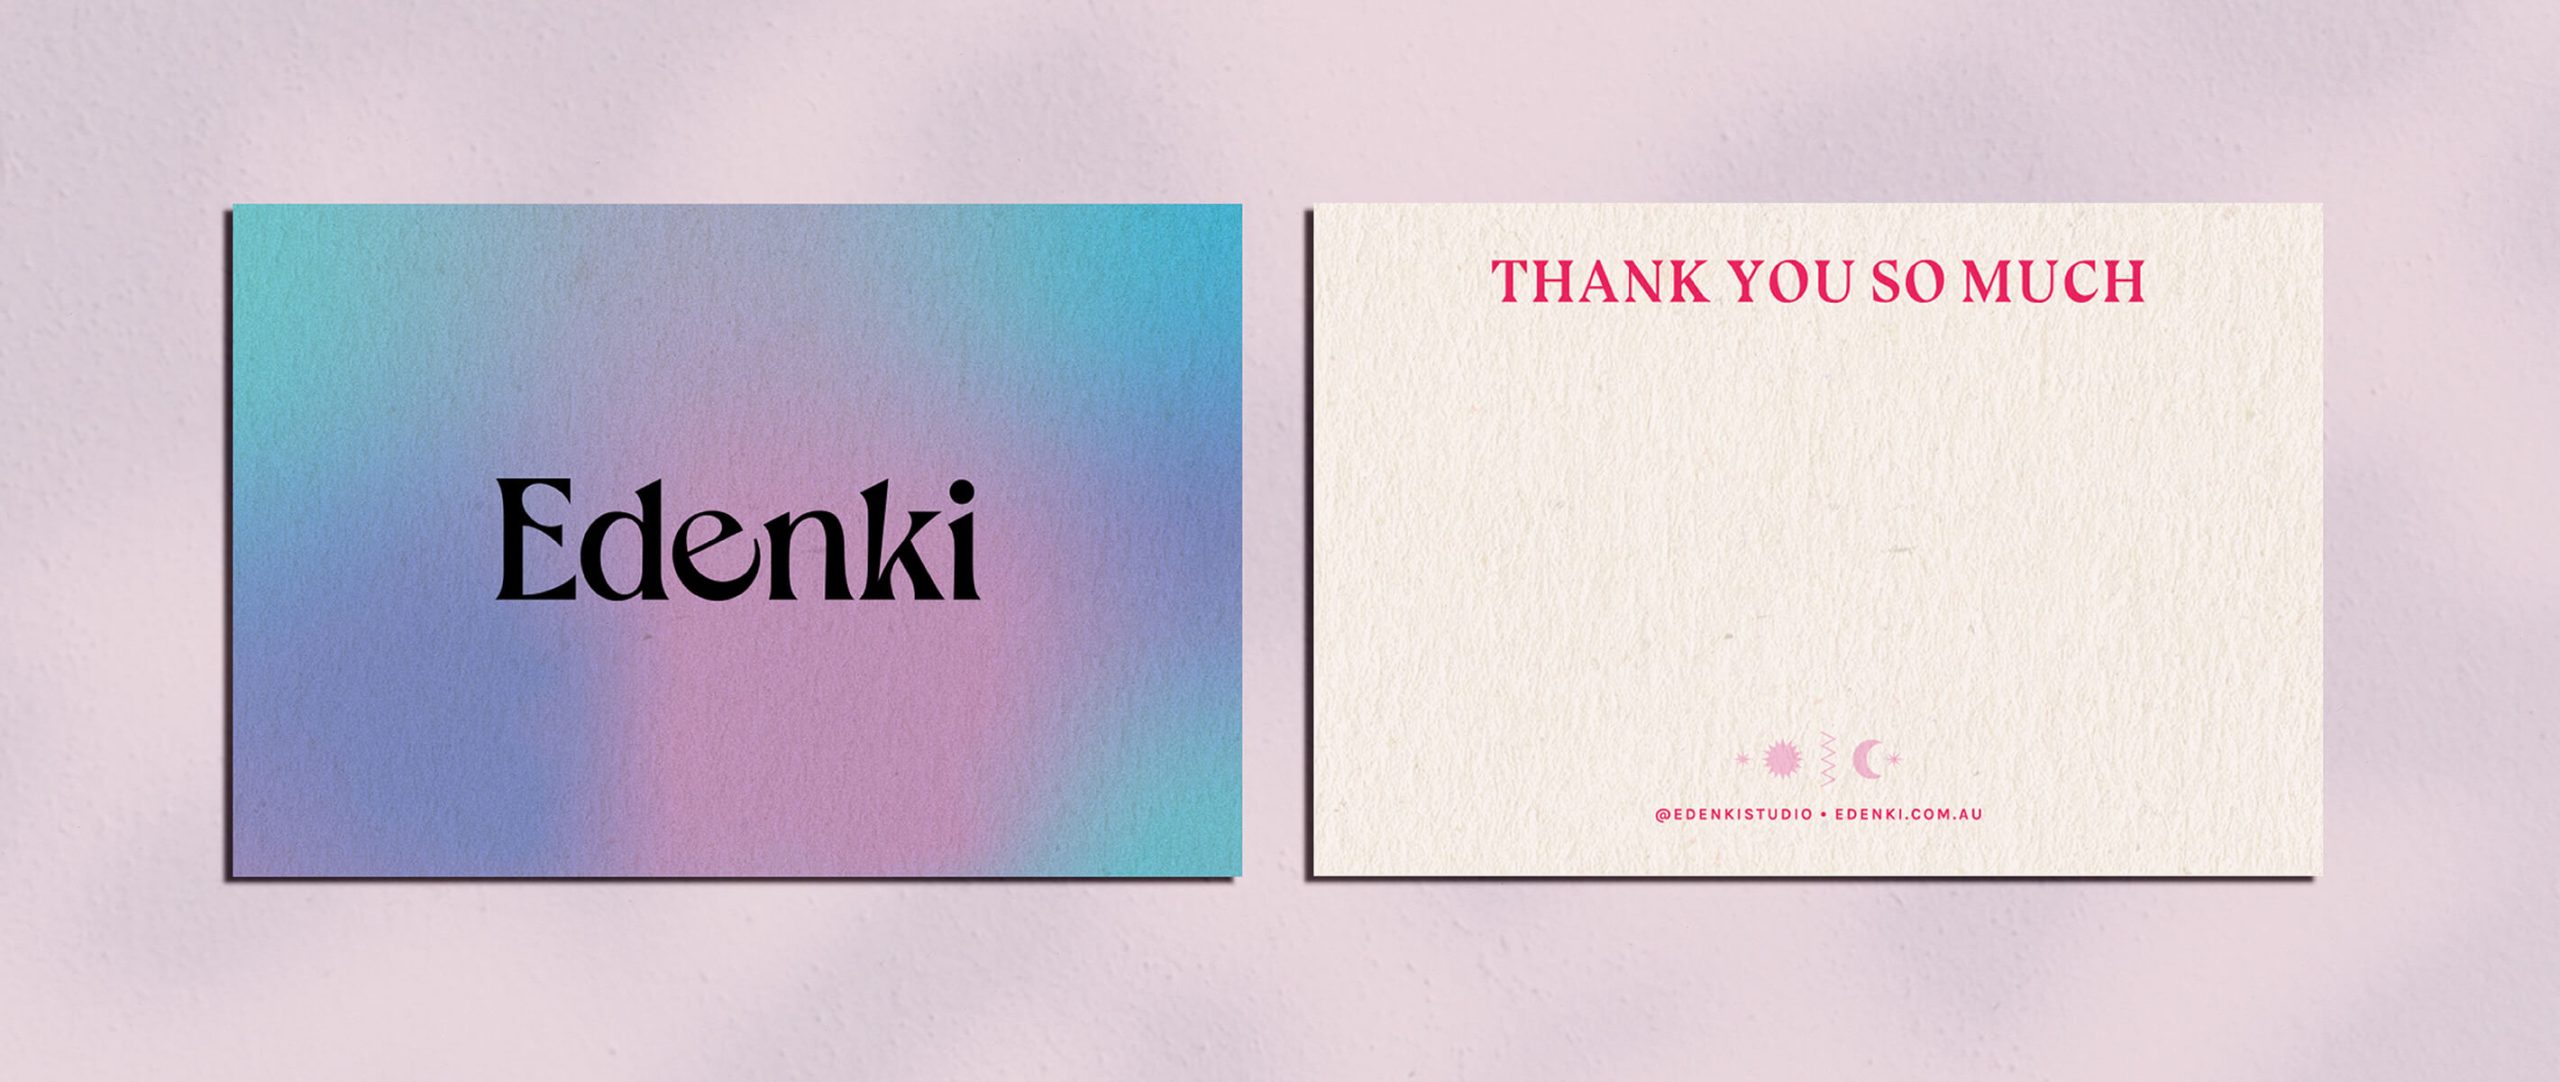 Brand design portfolio image of the Edenki thank you cards. The front image features the Edenki logo in black and a purple, pink and blue gradient. The back of the card is mostly blank for a written message with pink detailing.